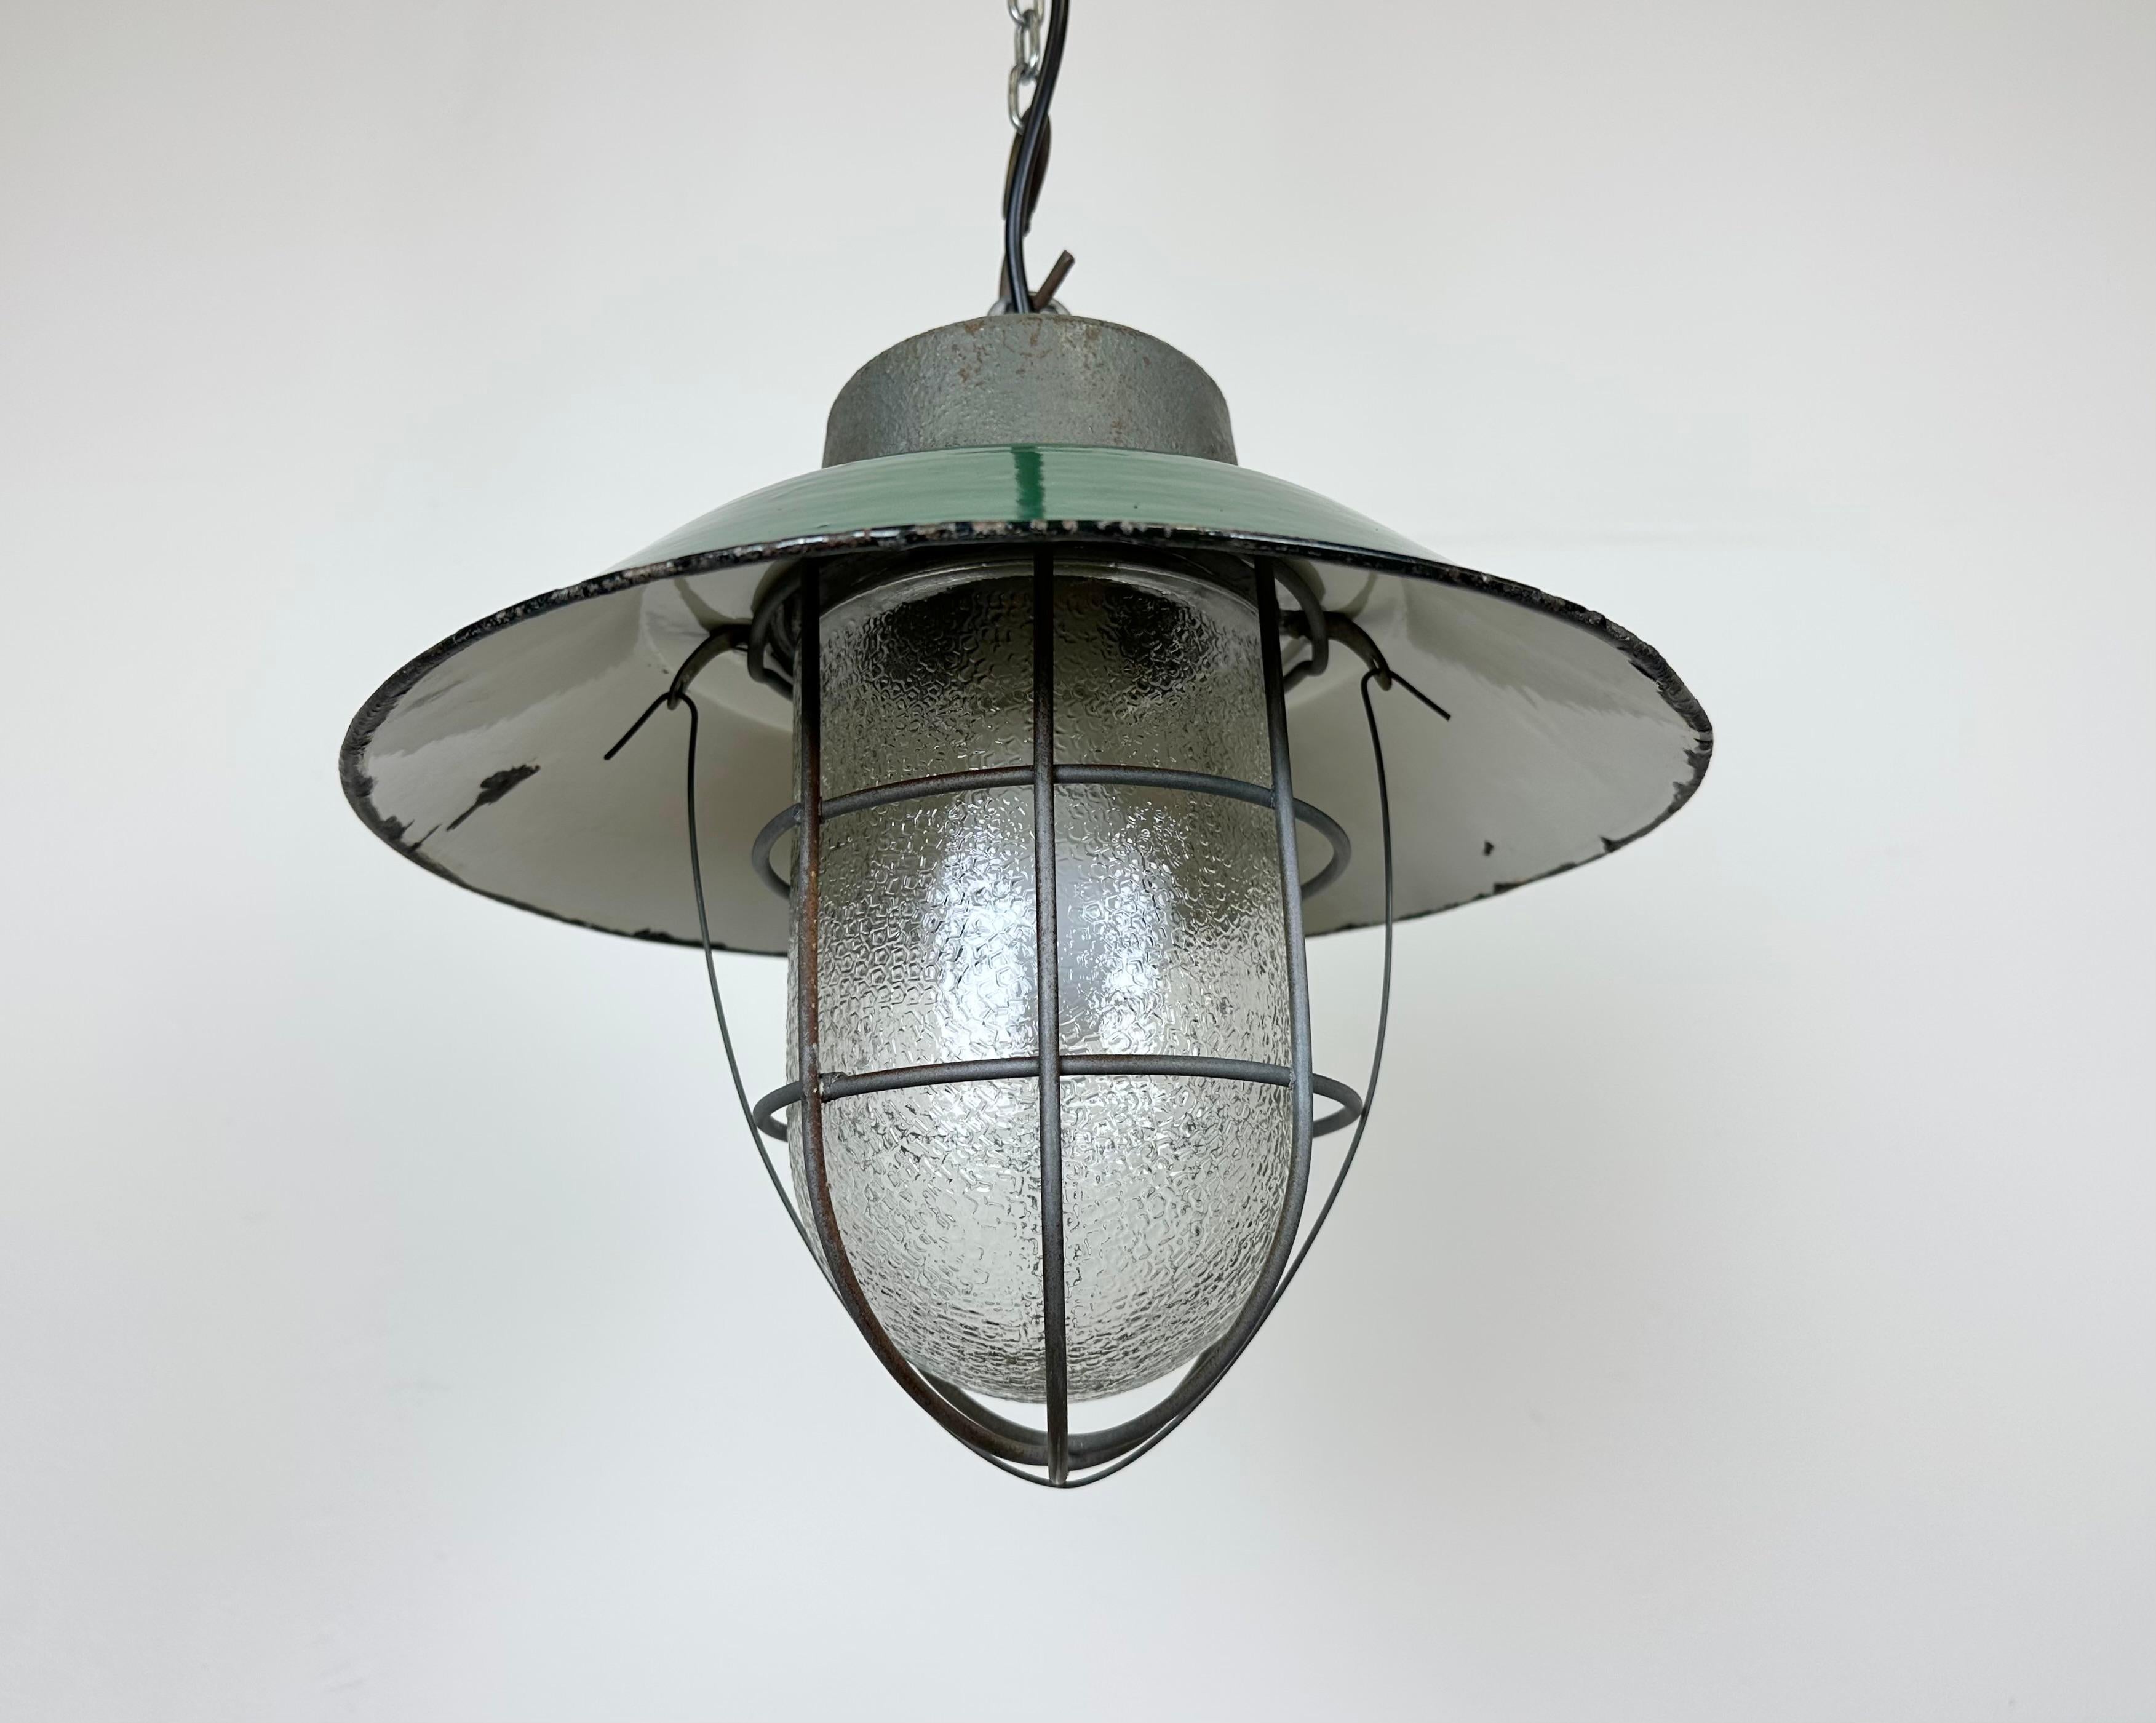 Green Enamel and Cast Iron Industrial Cage Pendant Light, 1960s For Sale 3